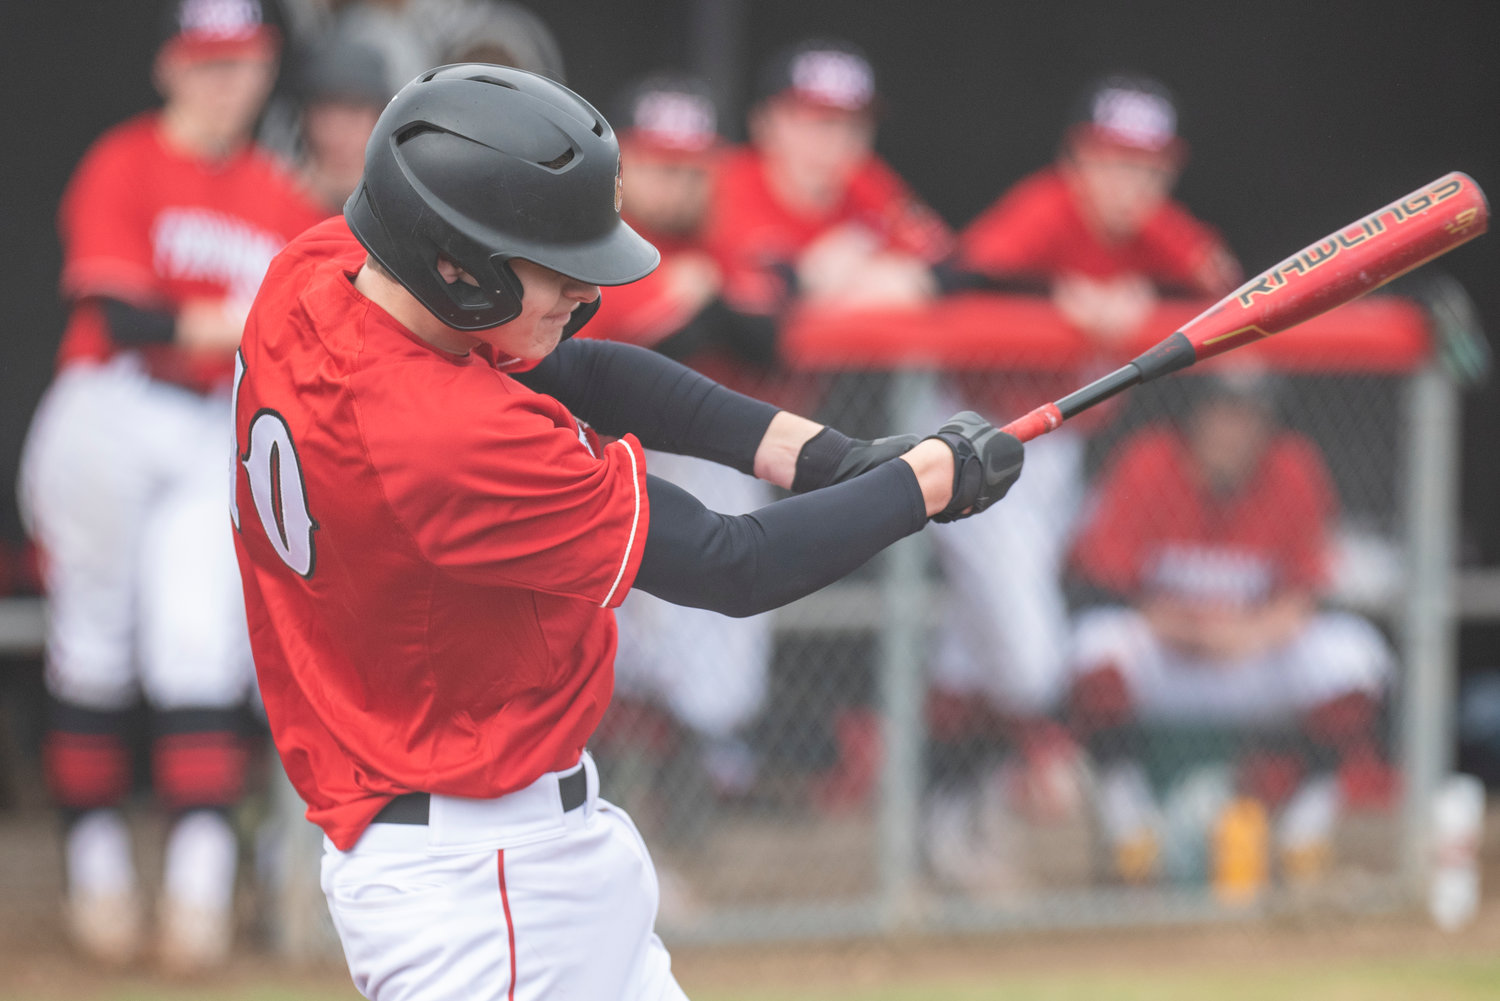 Tenino's Jack Burkhardt (10) takes a cut against Toledo during a home game on March 16.